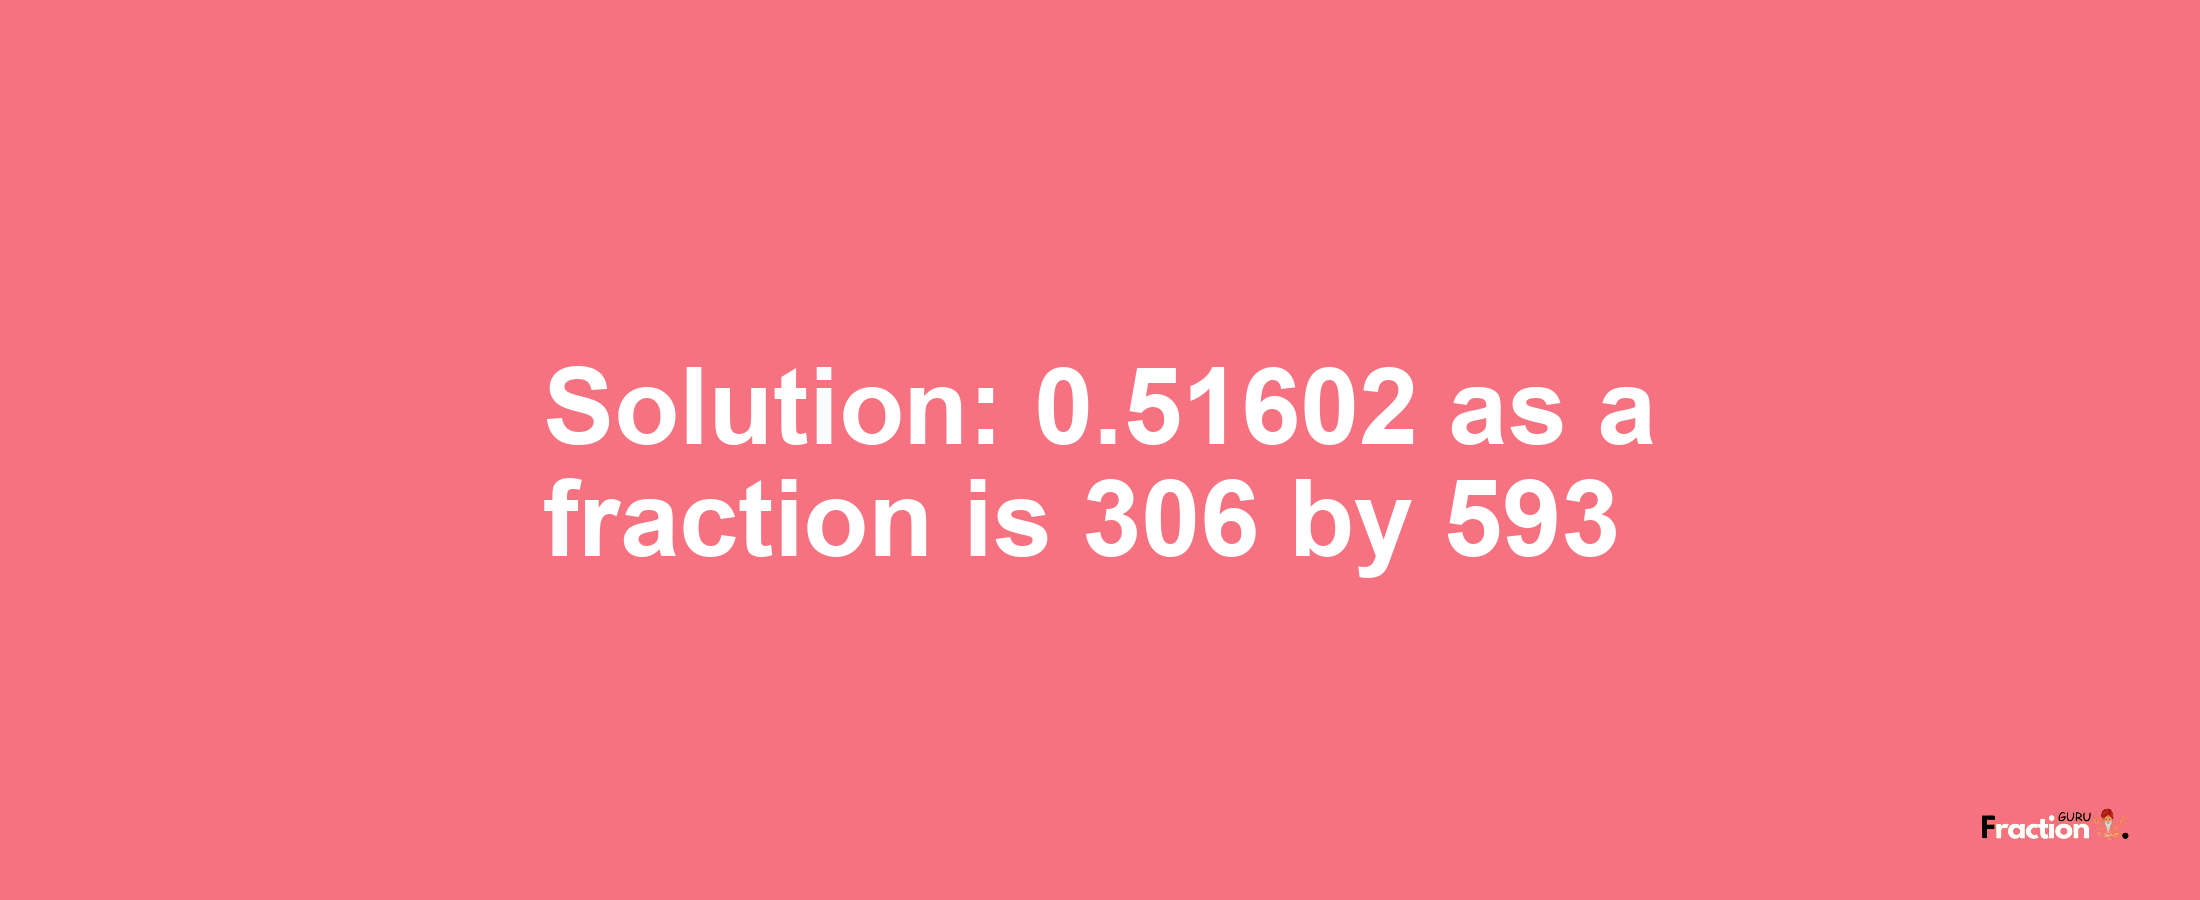 Solution:0.51602 as a fraction is 306/593